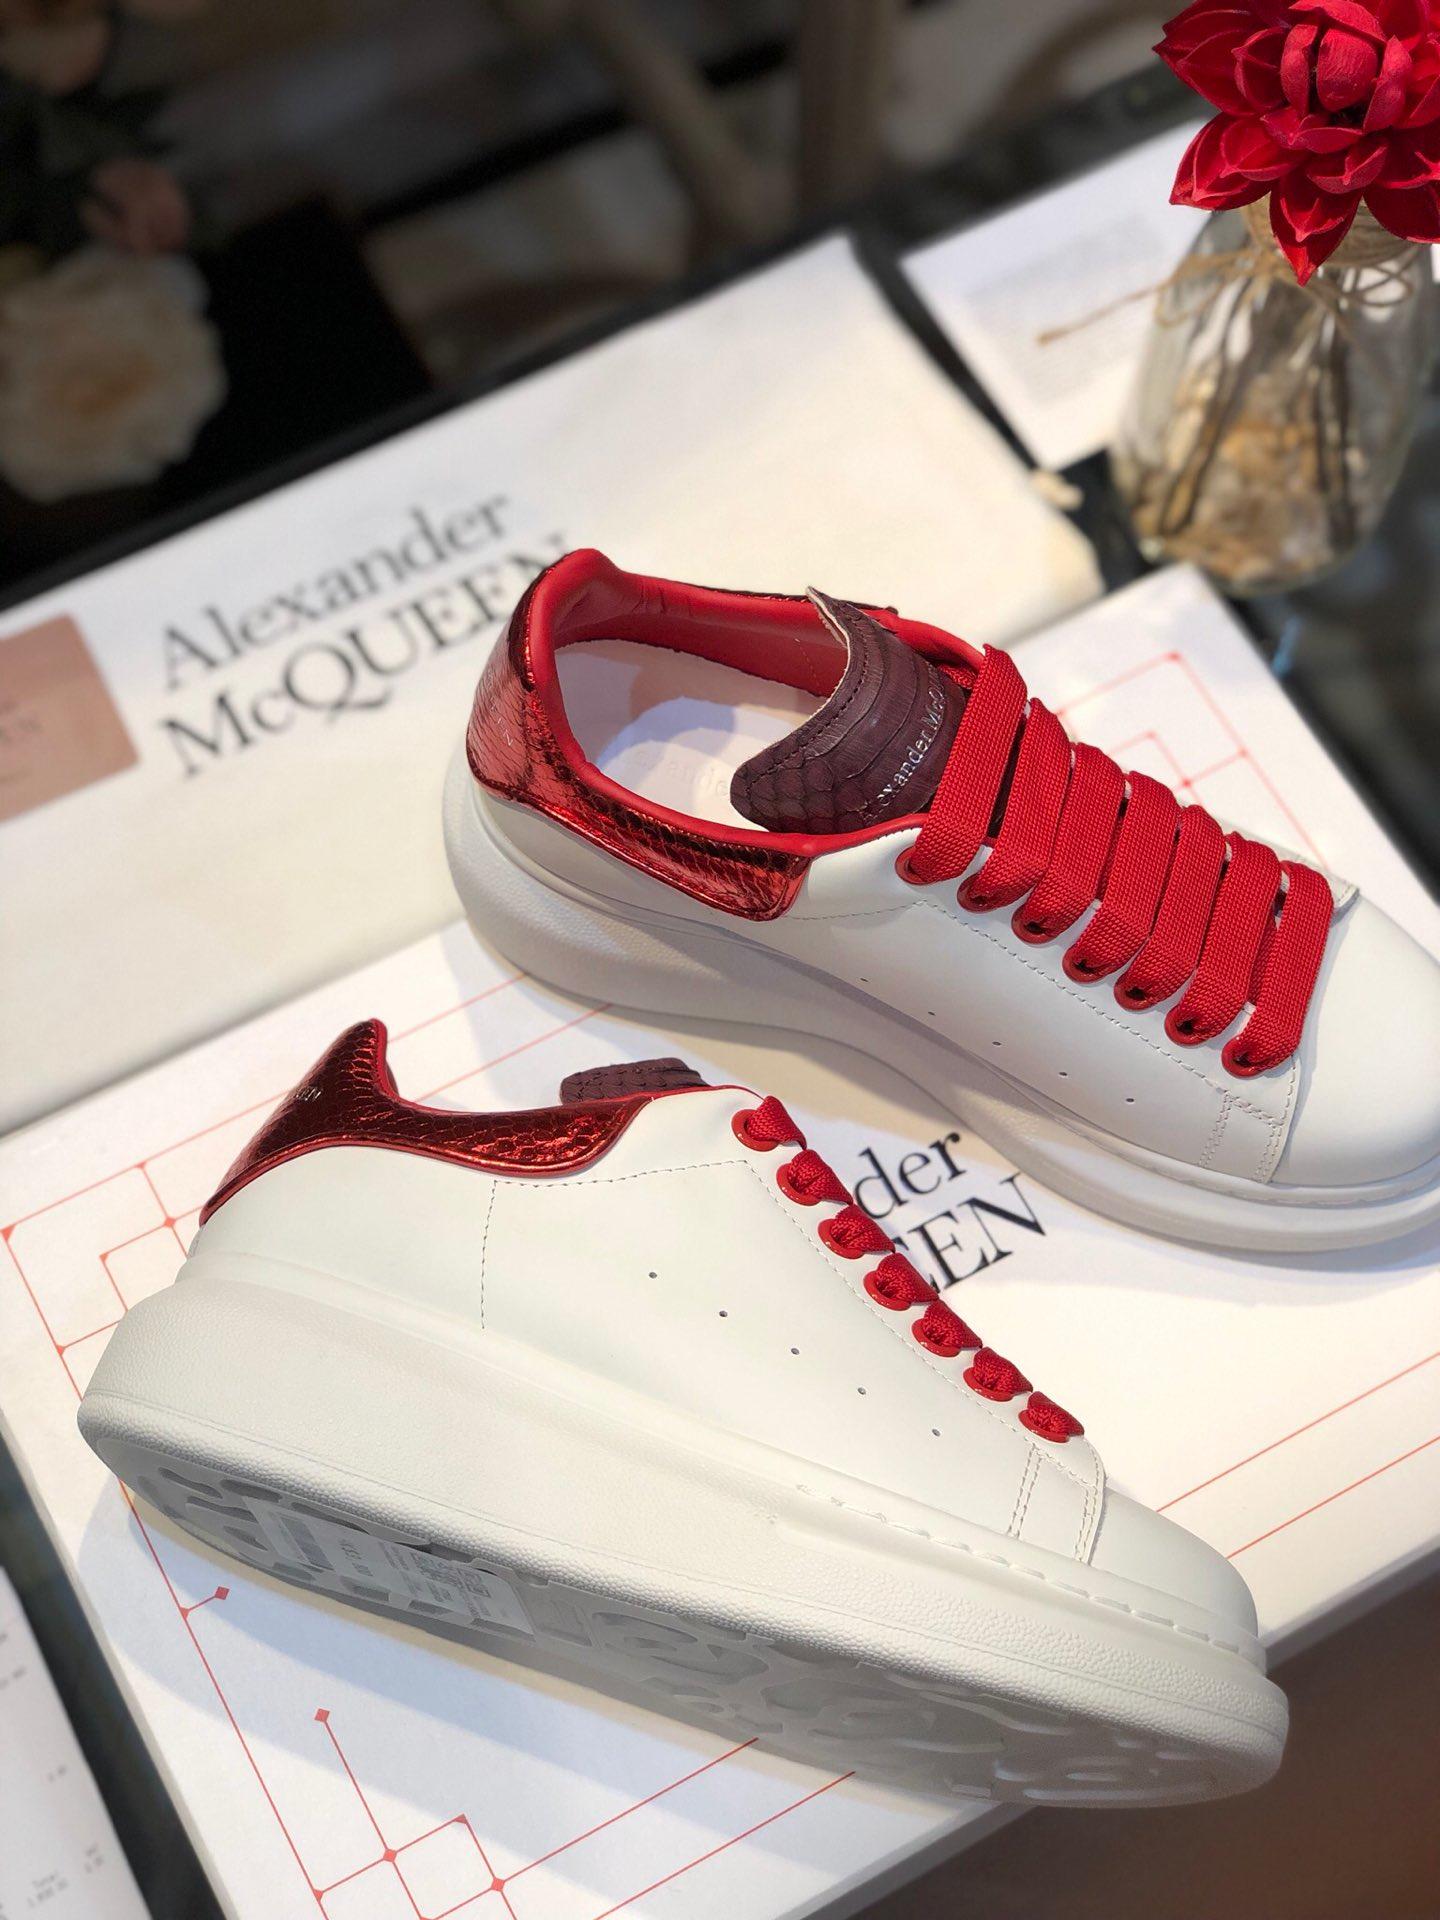 Alexander McQueen Fahion Sneakers White and red snake heel with burgundy tongue MS100011